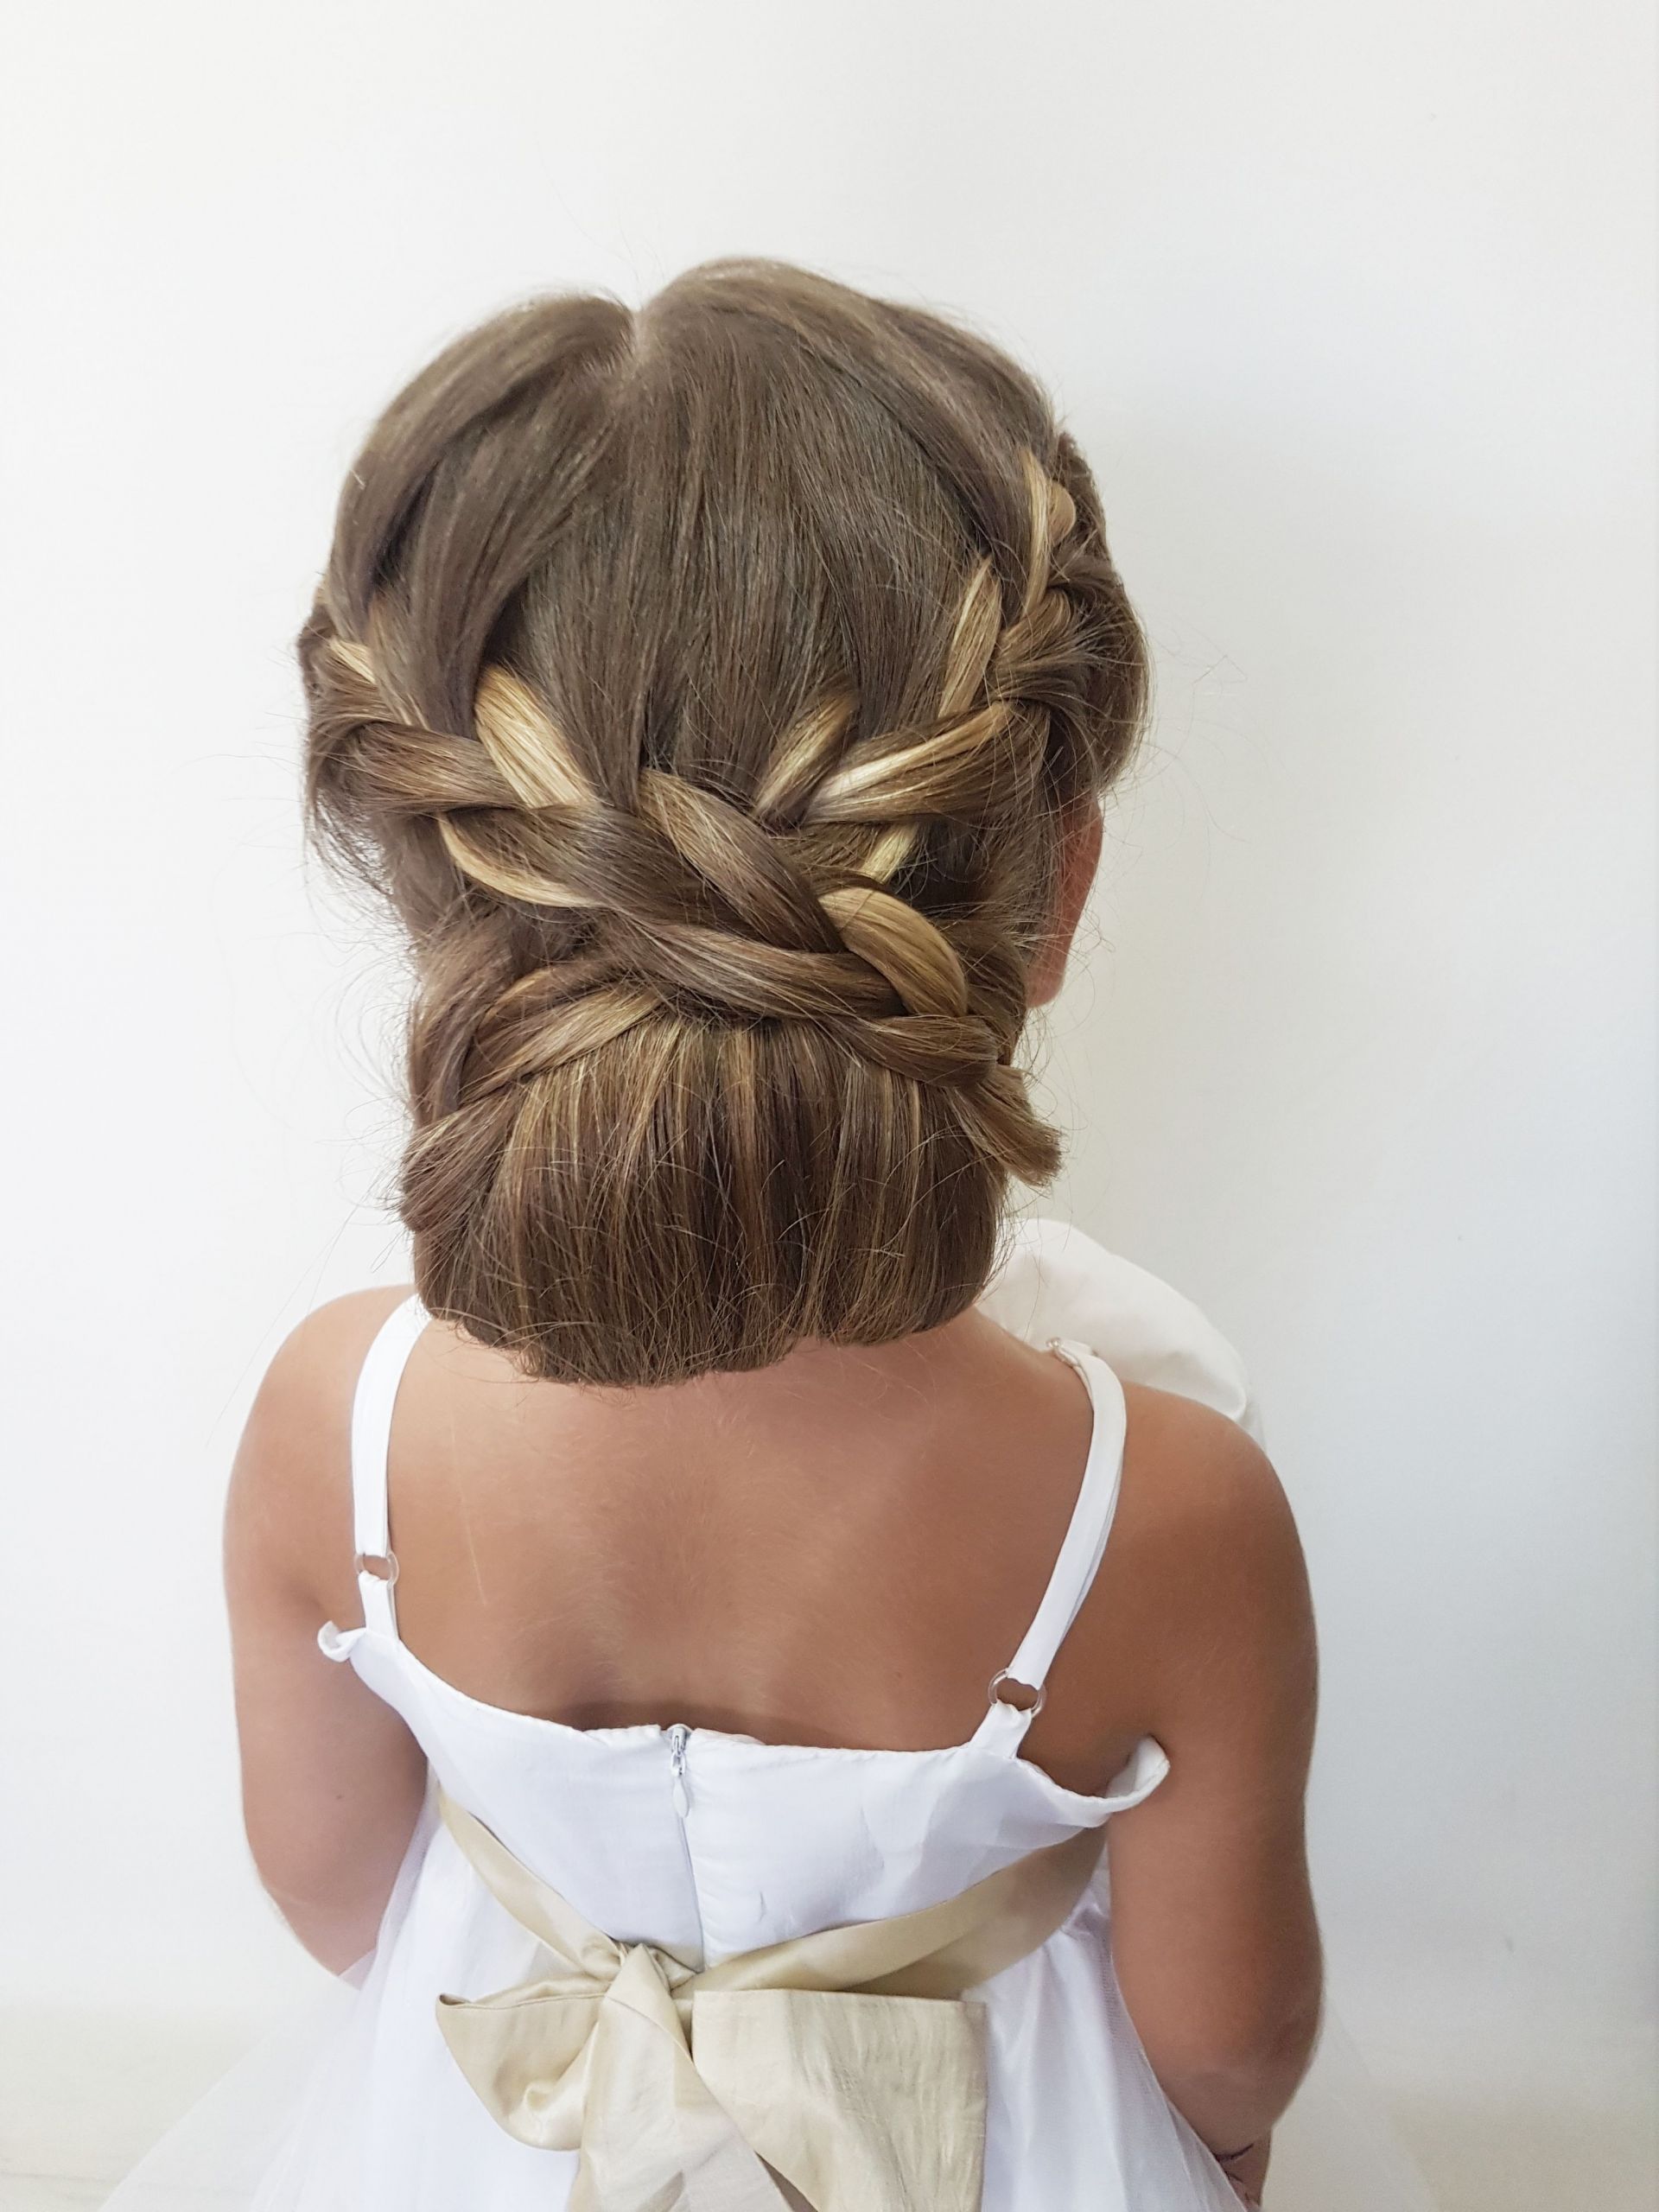 Flower Girl Updo Hairstyles
 Pin by Kennedy Libengood on Hair&Beauty